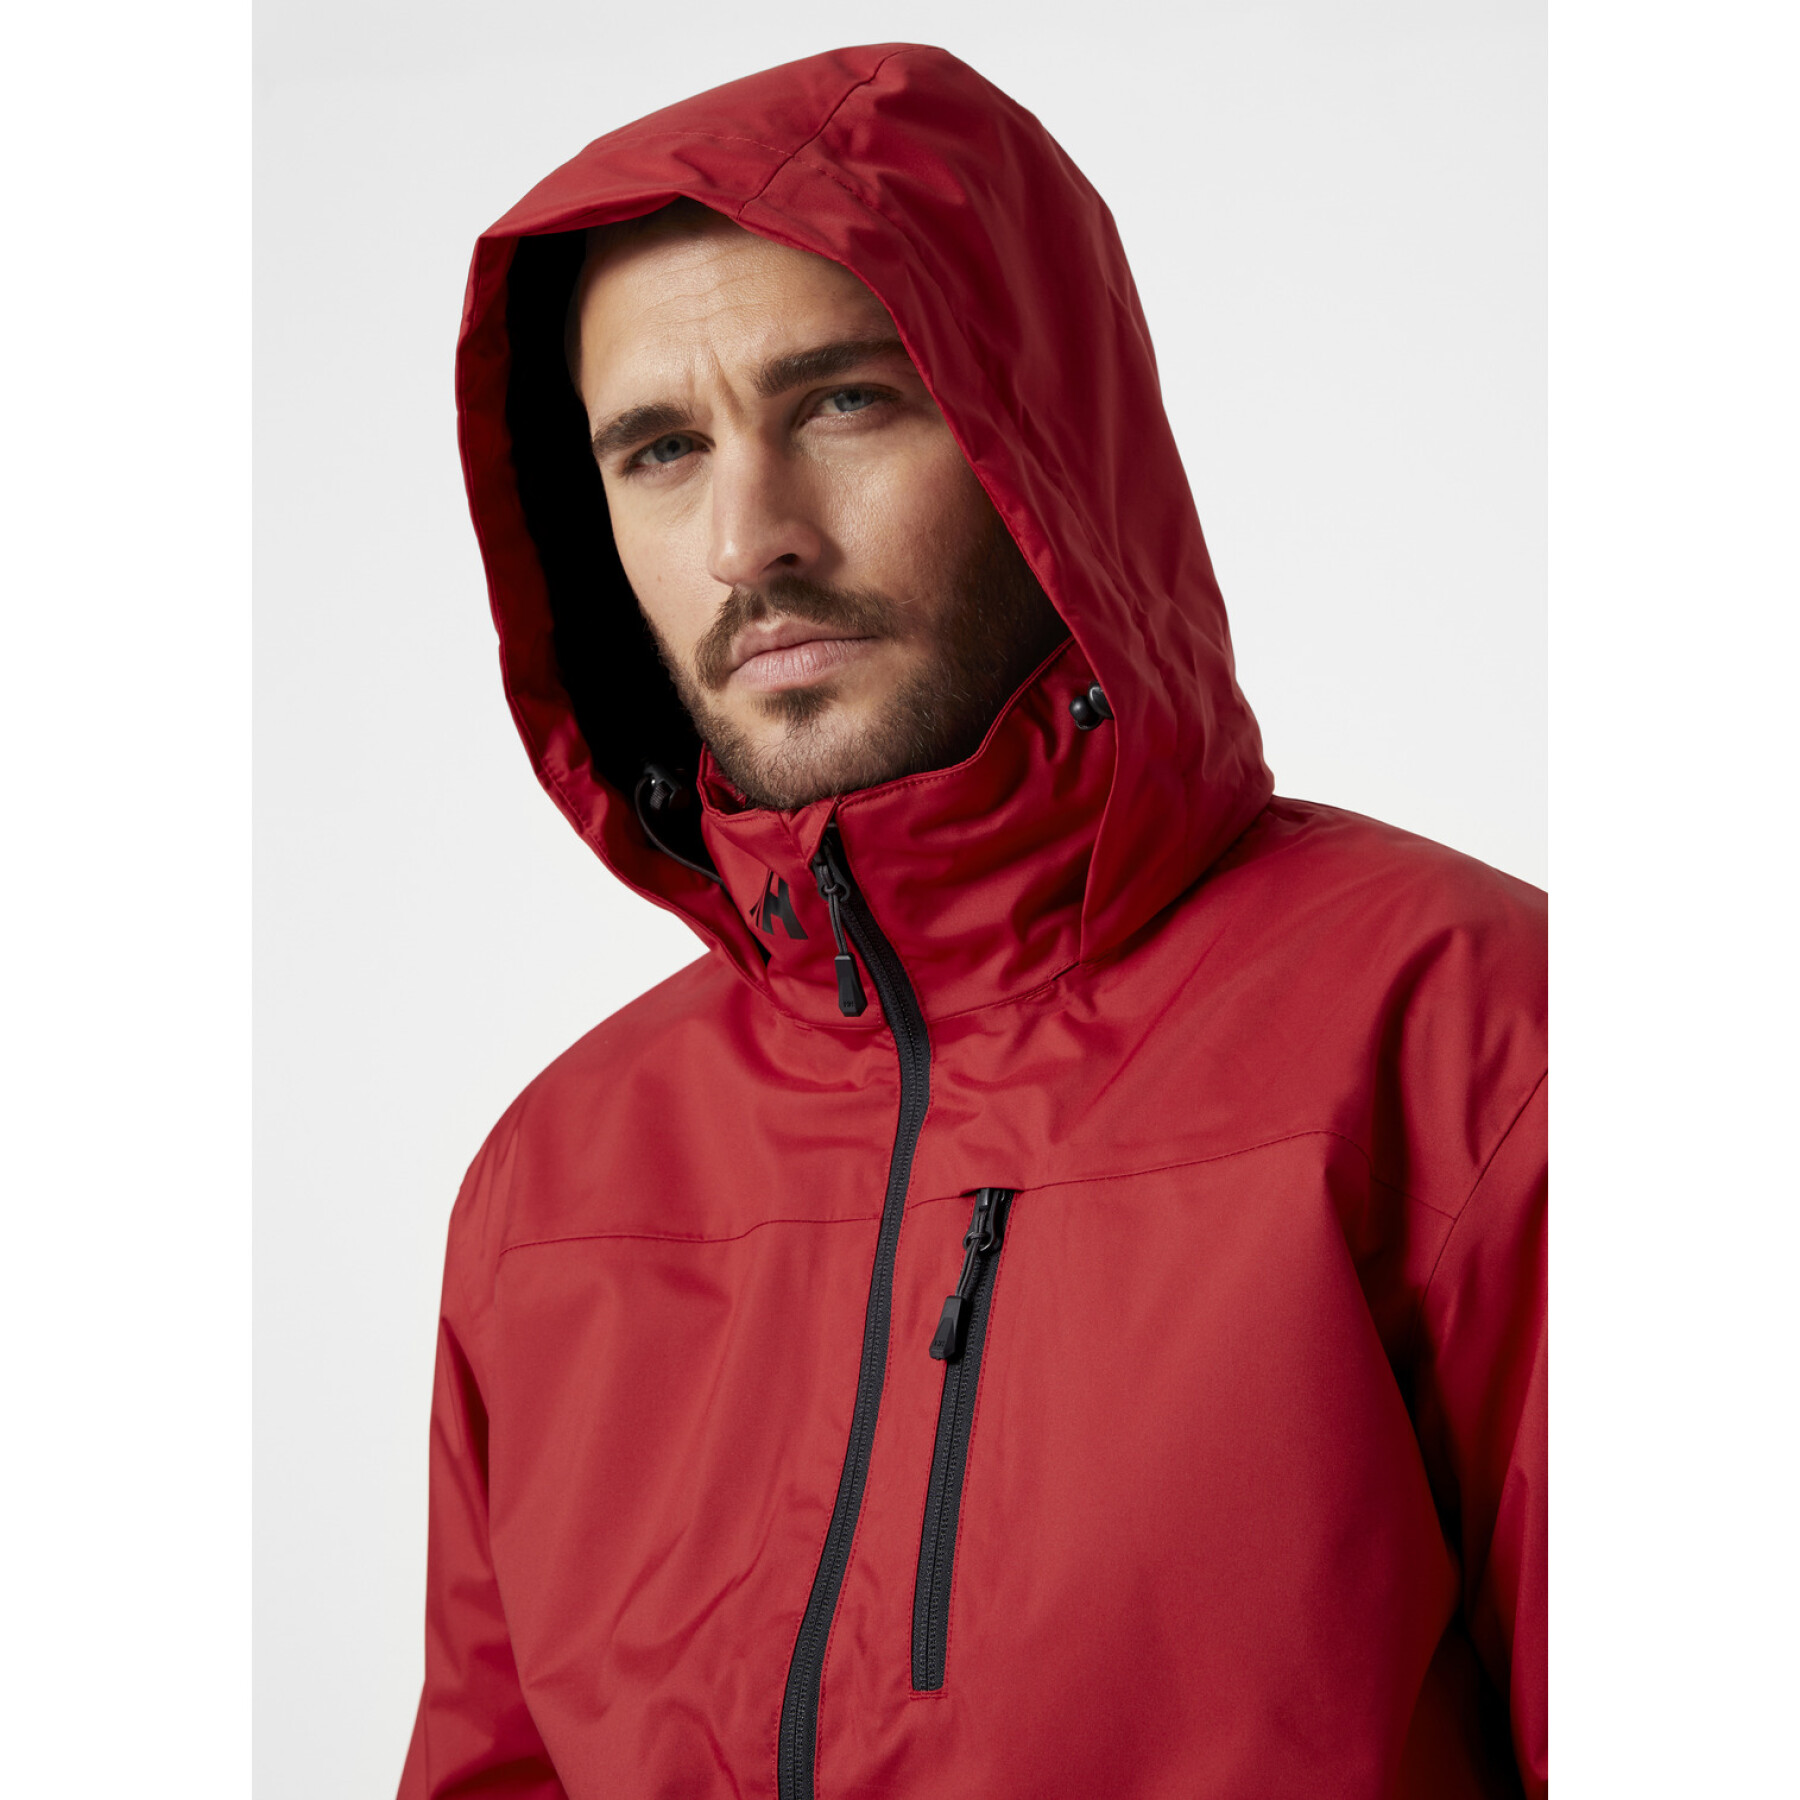 Waterproof jacket with round neck and hood Helly Hansen